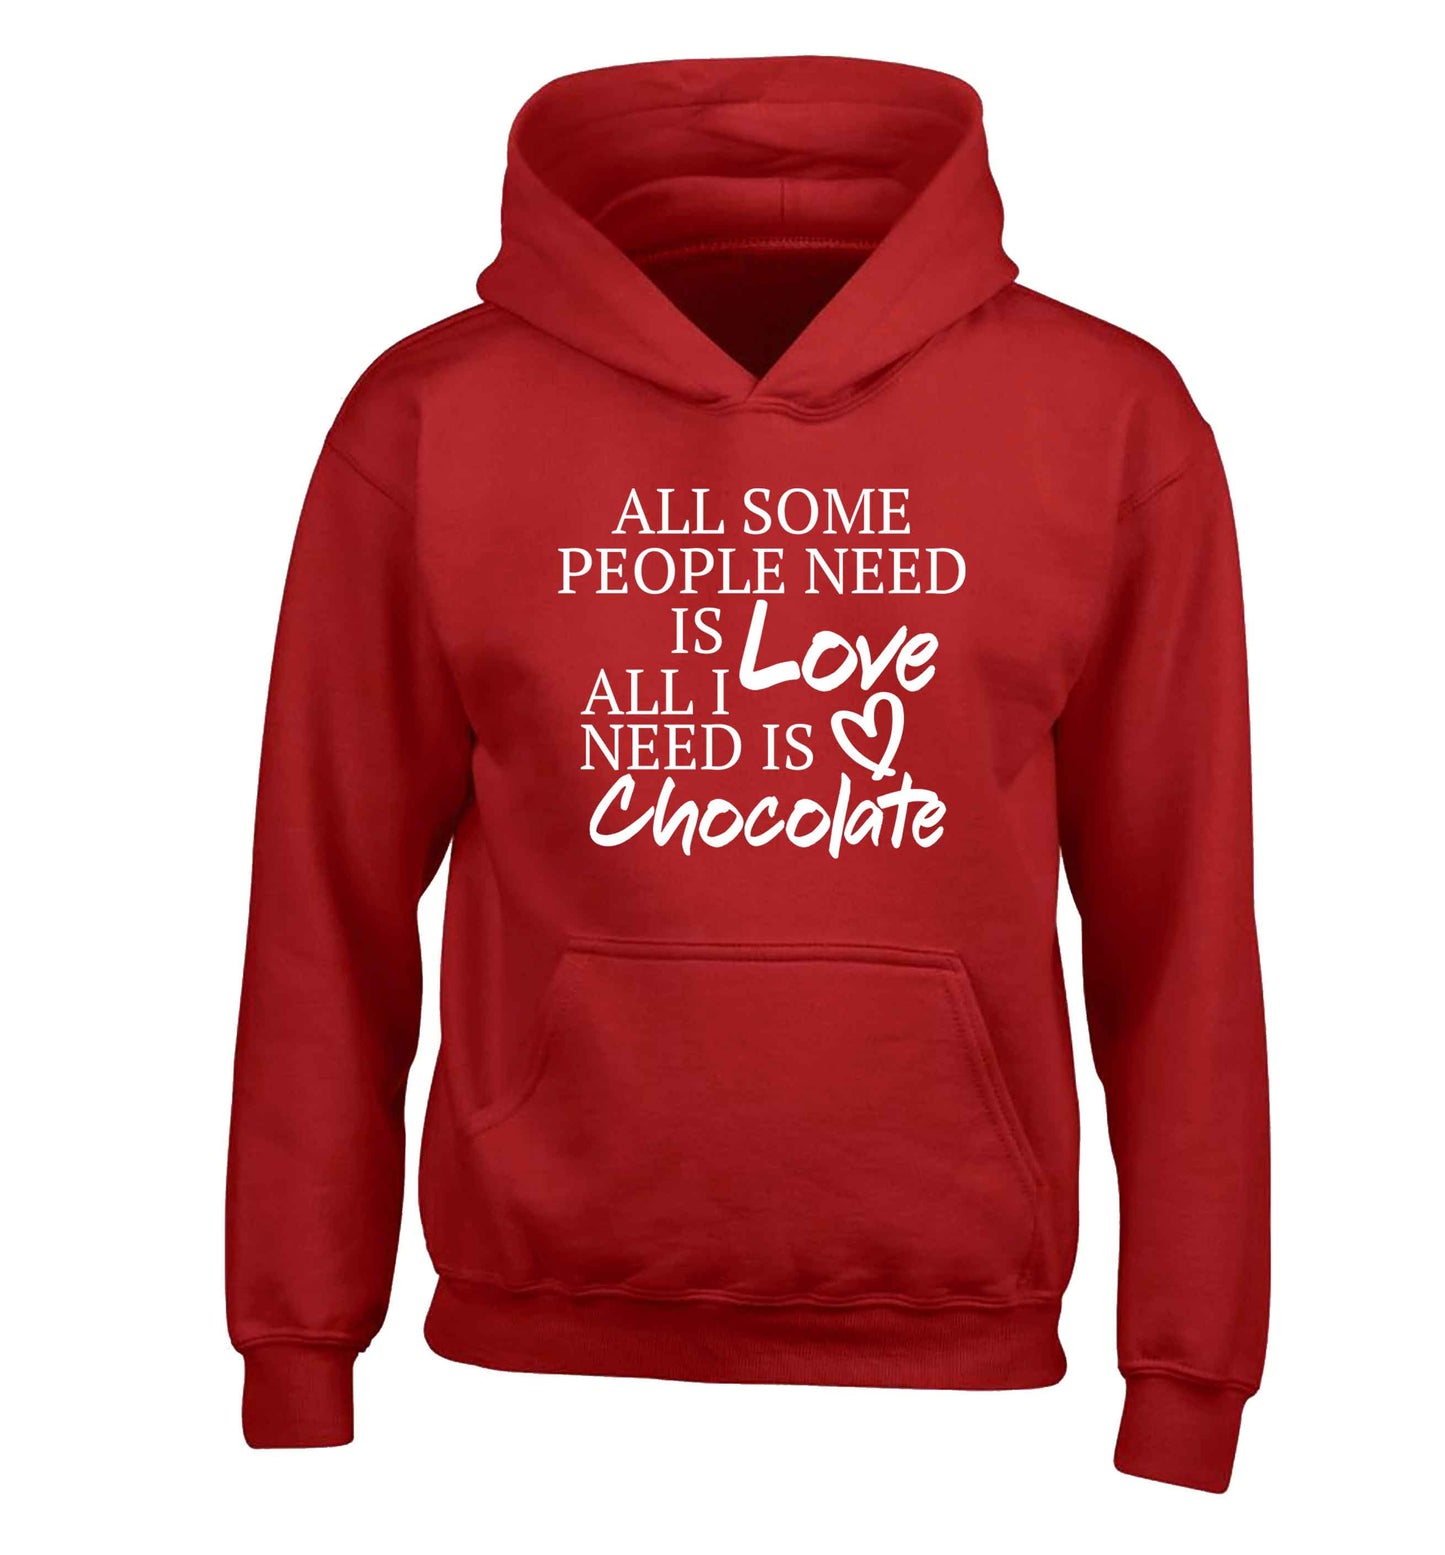 All some people need is love all I need is chocolate children's red hoodie 12-13 Years